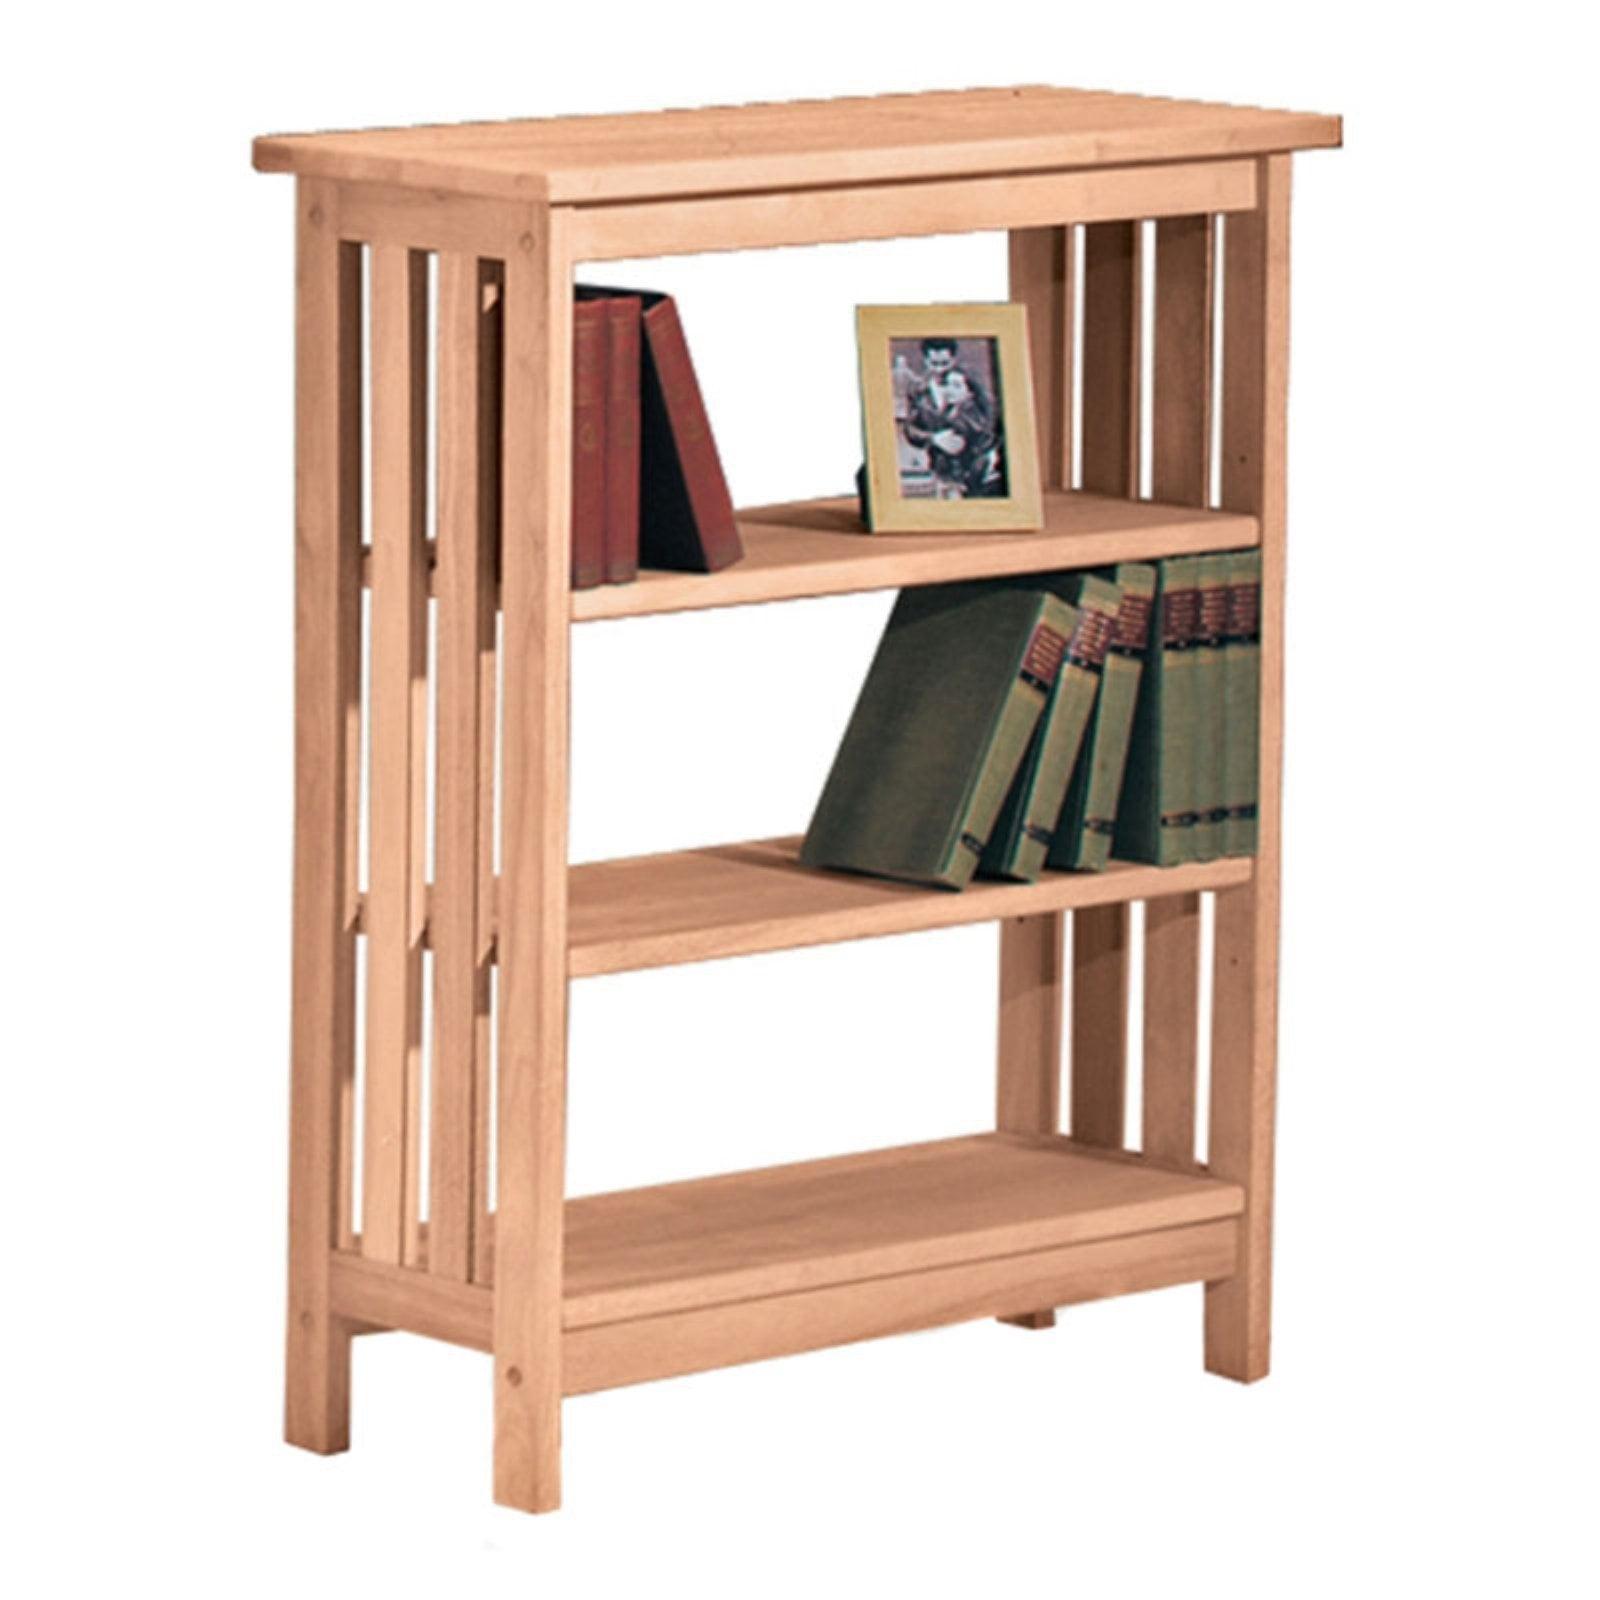 Adjustable Solid Parawood Mission-Style 3-Tier Shelf Unit in Brown